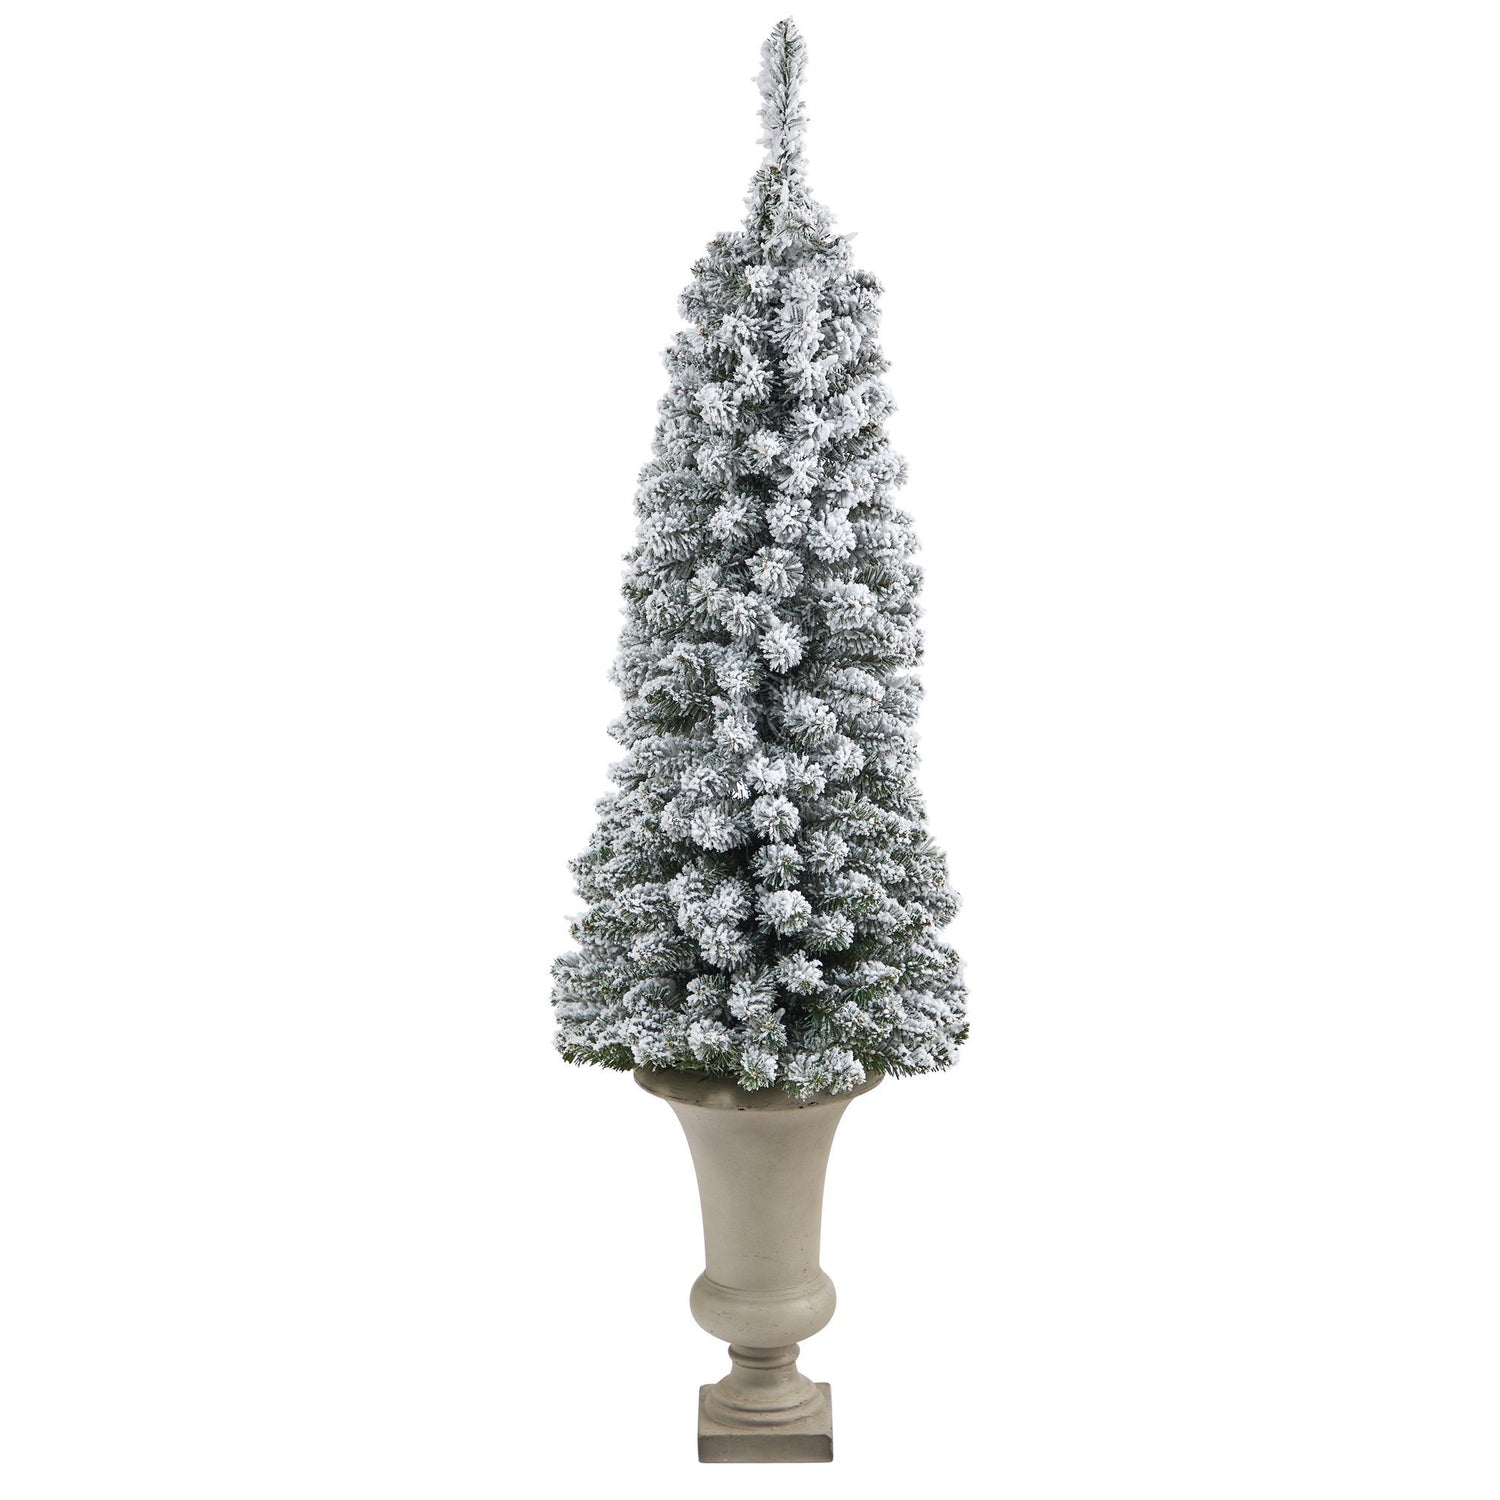 4.5’ Flocked Pencil Artificial Christmas Tree with 100 Clear Lights and 216 Bendable Branches in Sand Colored Urn